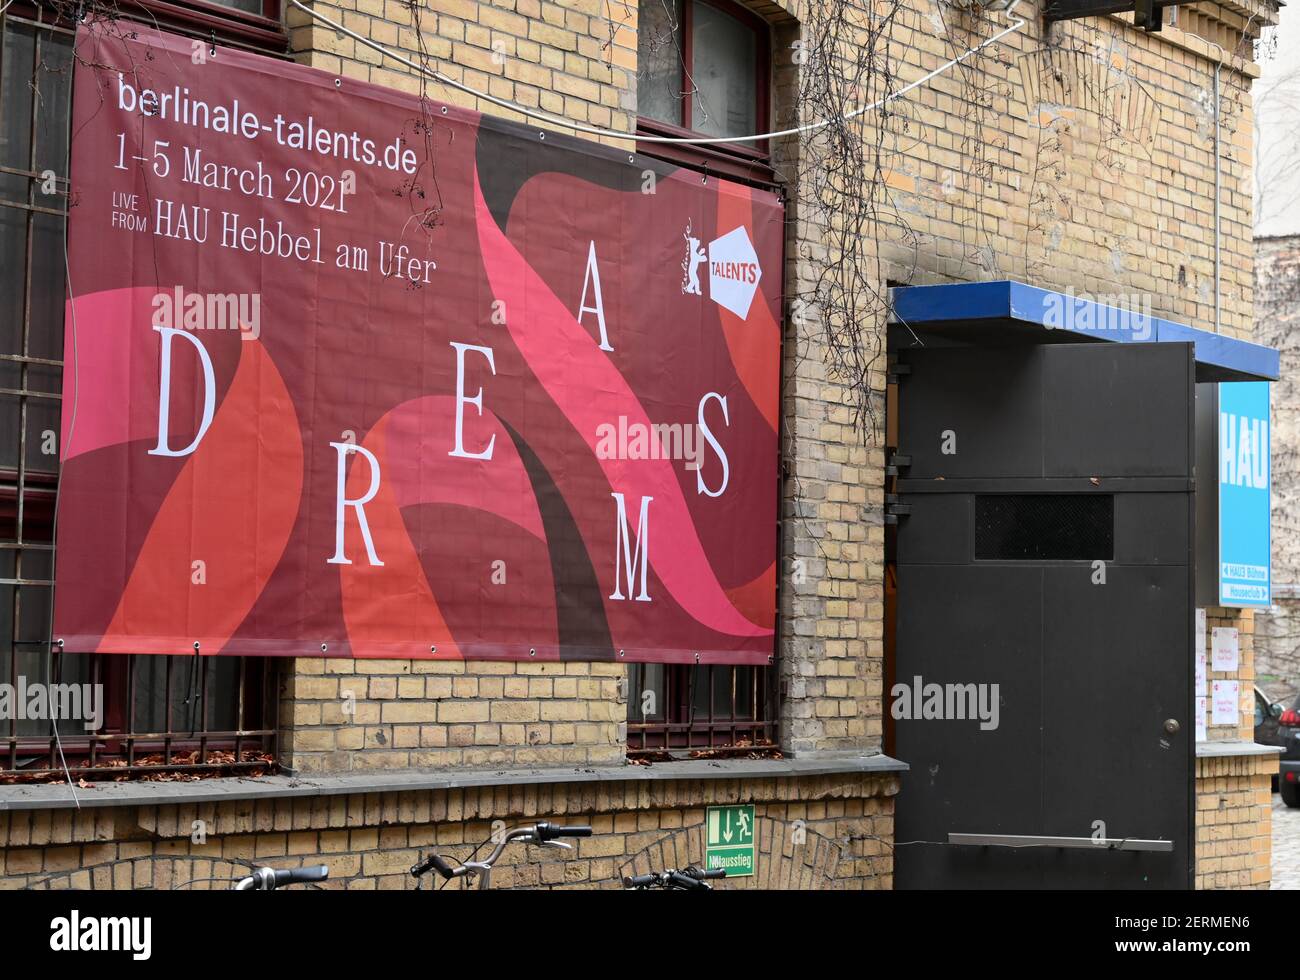 Berlin, Germany. 28th Feb, 2021. A poster with the letters of the word 'Dreams' of the Berlinale Talents can be seen at HAU3 Theater HAU - Hebbel am Ufer. It is an initiative of the Berlin International Film Festival (Berlinale) with the aim of networking selected talents from all over the world and bringing them together with renowned experts from the film industry. This year, Berlinale Talents is an online event for up-and-coming filmmakers. Credit: Jens Kalaene/dpa-Zentralbild/ZB/dpa/Alamy Live News Stock Photo